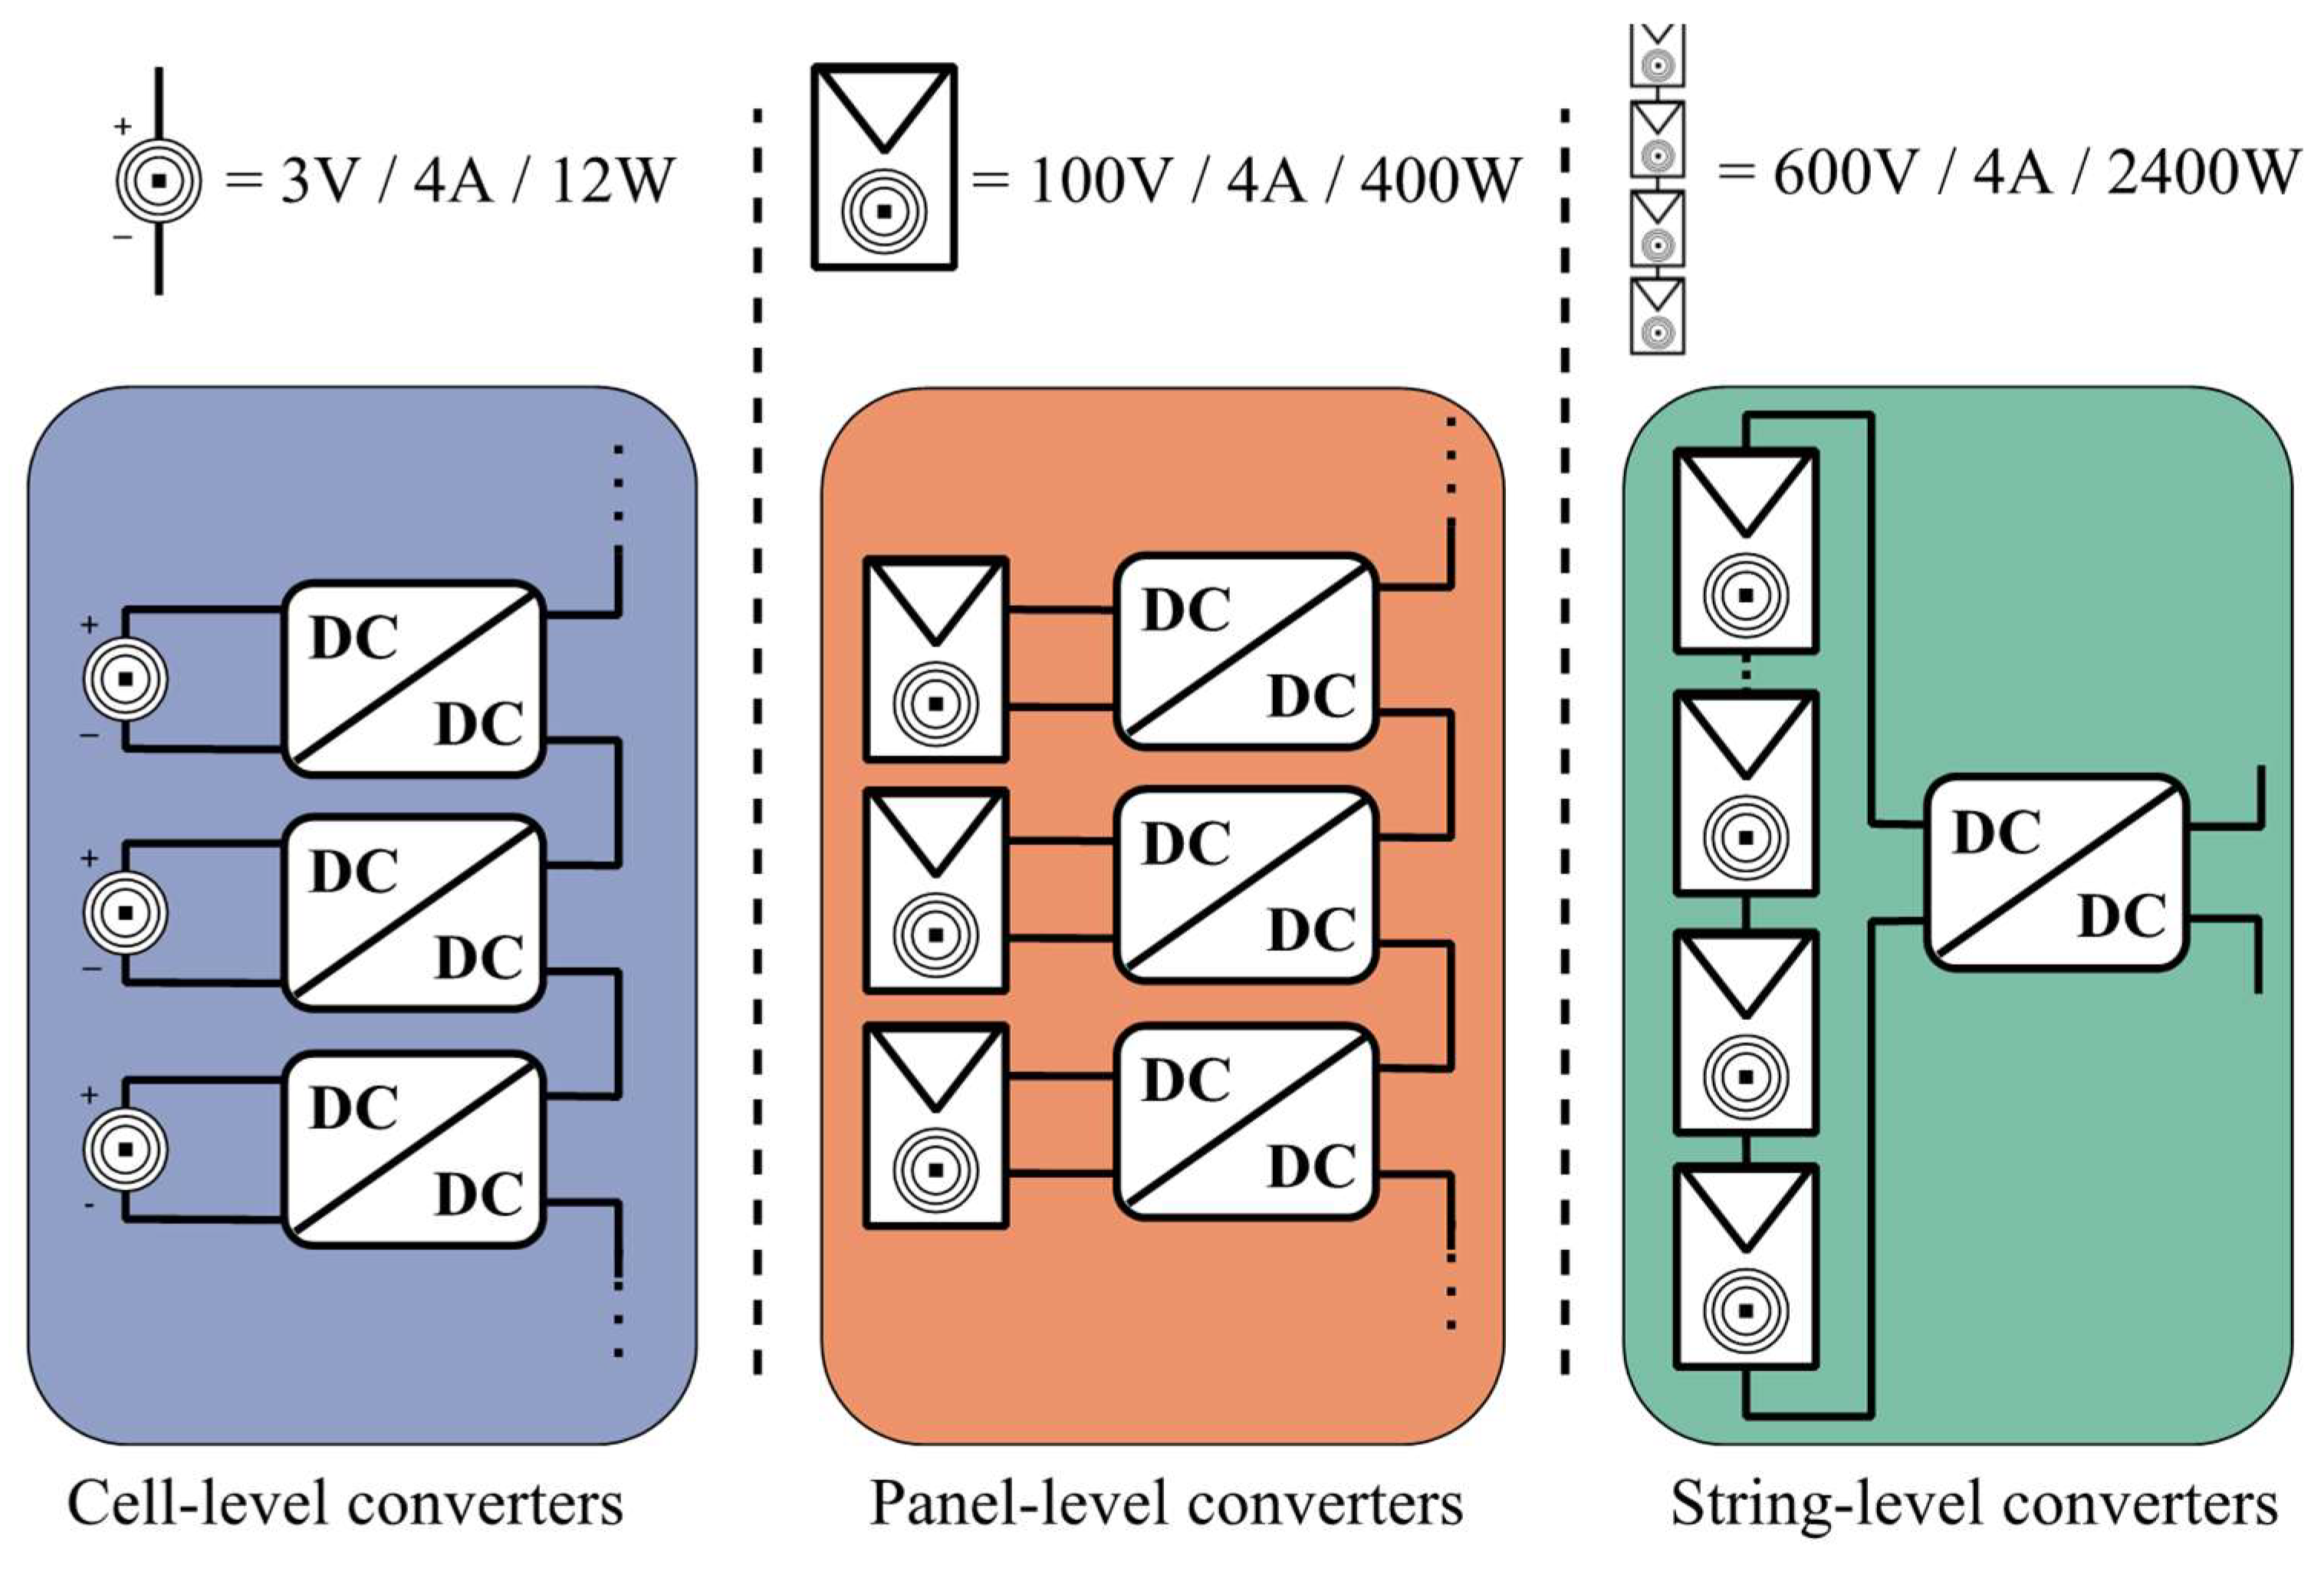 Analysis of Four DC-DC Converters in Equilibrium - Technical Articles